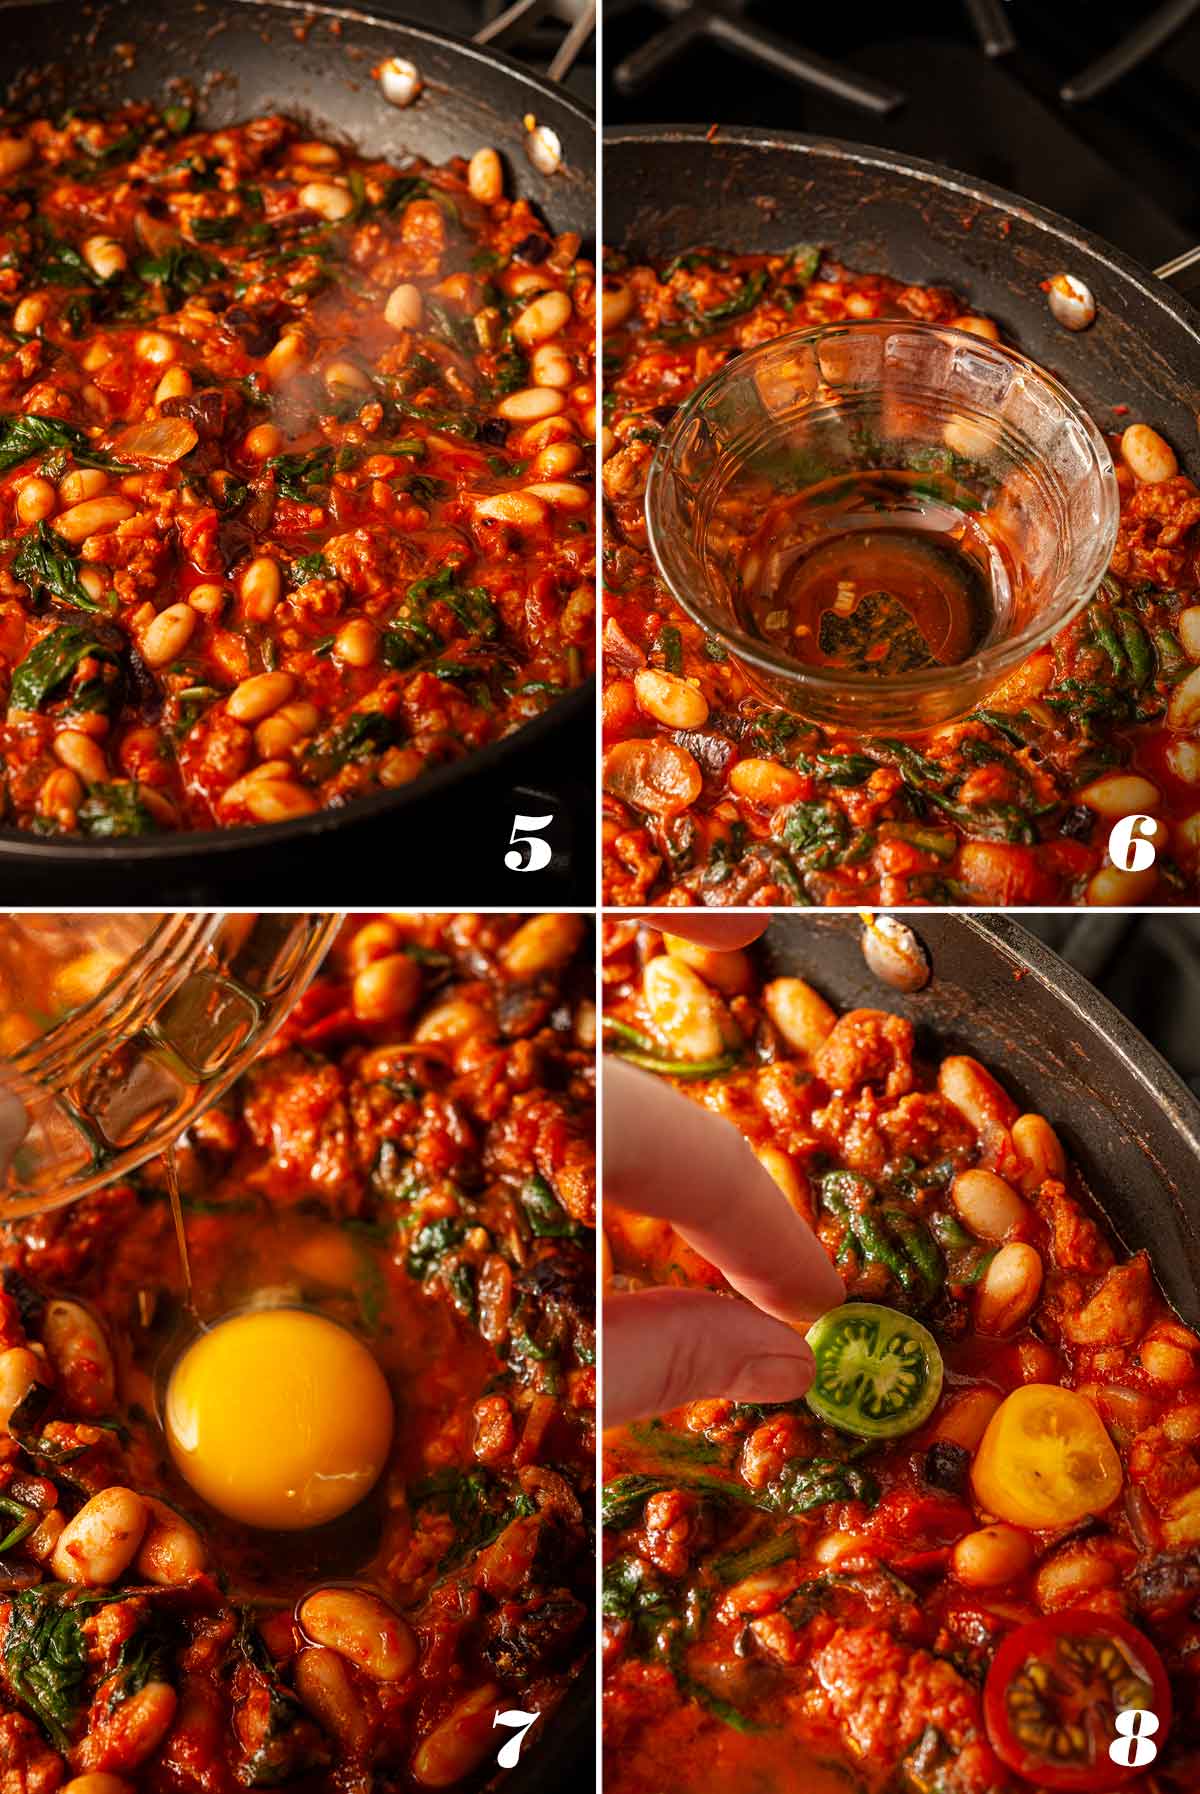 A collage of 4 numbered images showing how to mix ingredients of Italian Eggs in Purgatory.